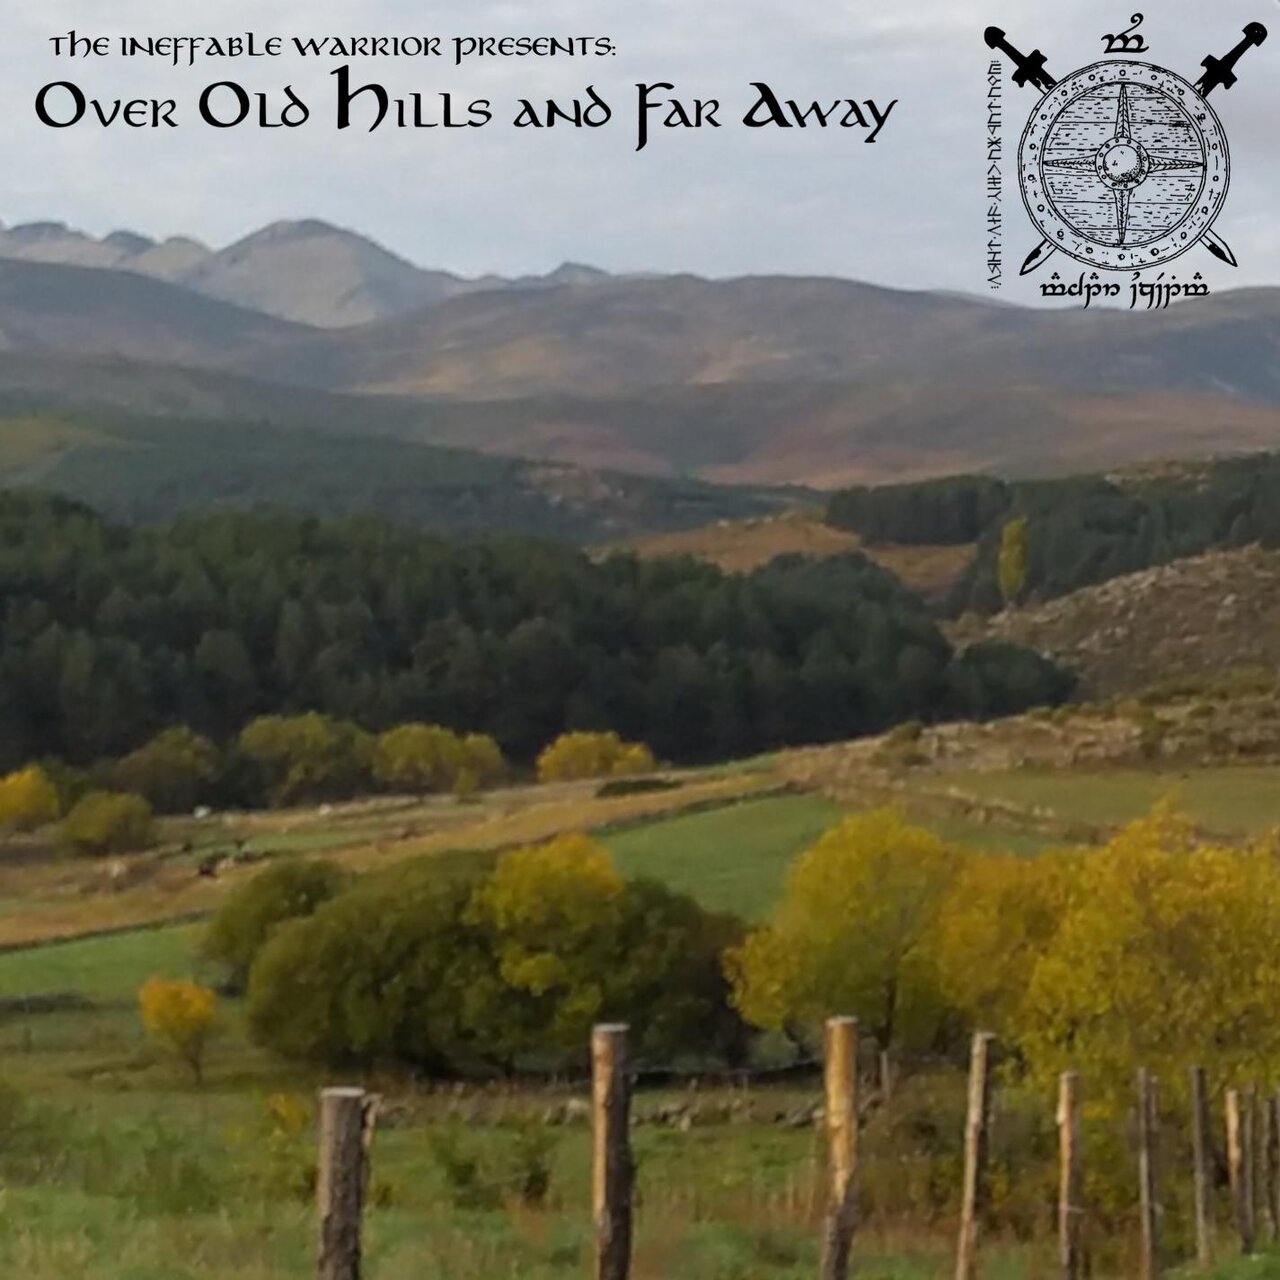 Hills and far away. Over the Hills and far away. Faraway (2023). Over the Hills and far away Vocal. Over the Hills and far away Vocal Lyrics.